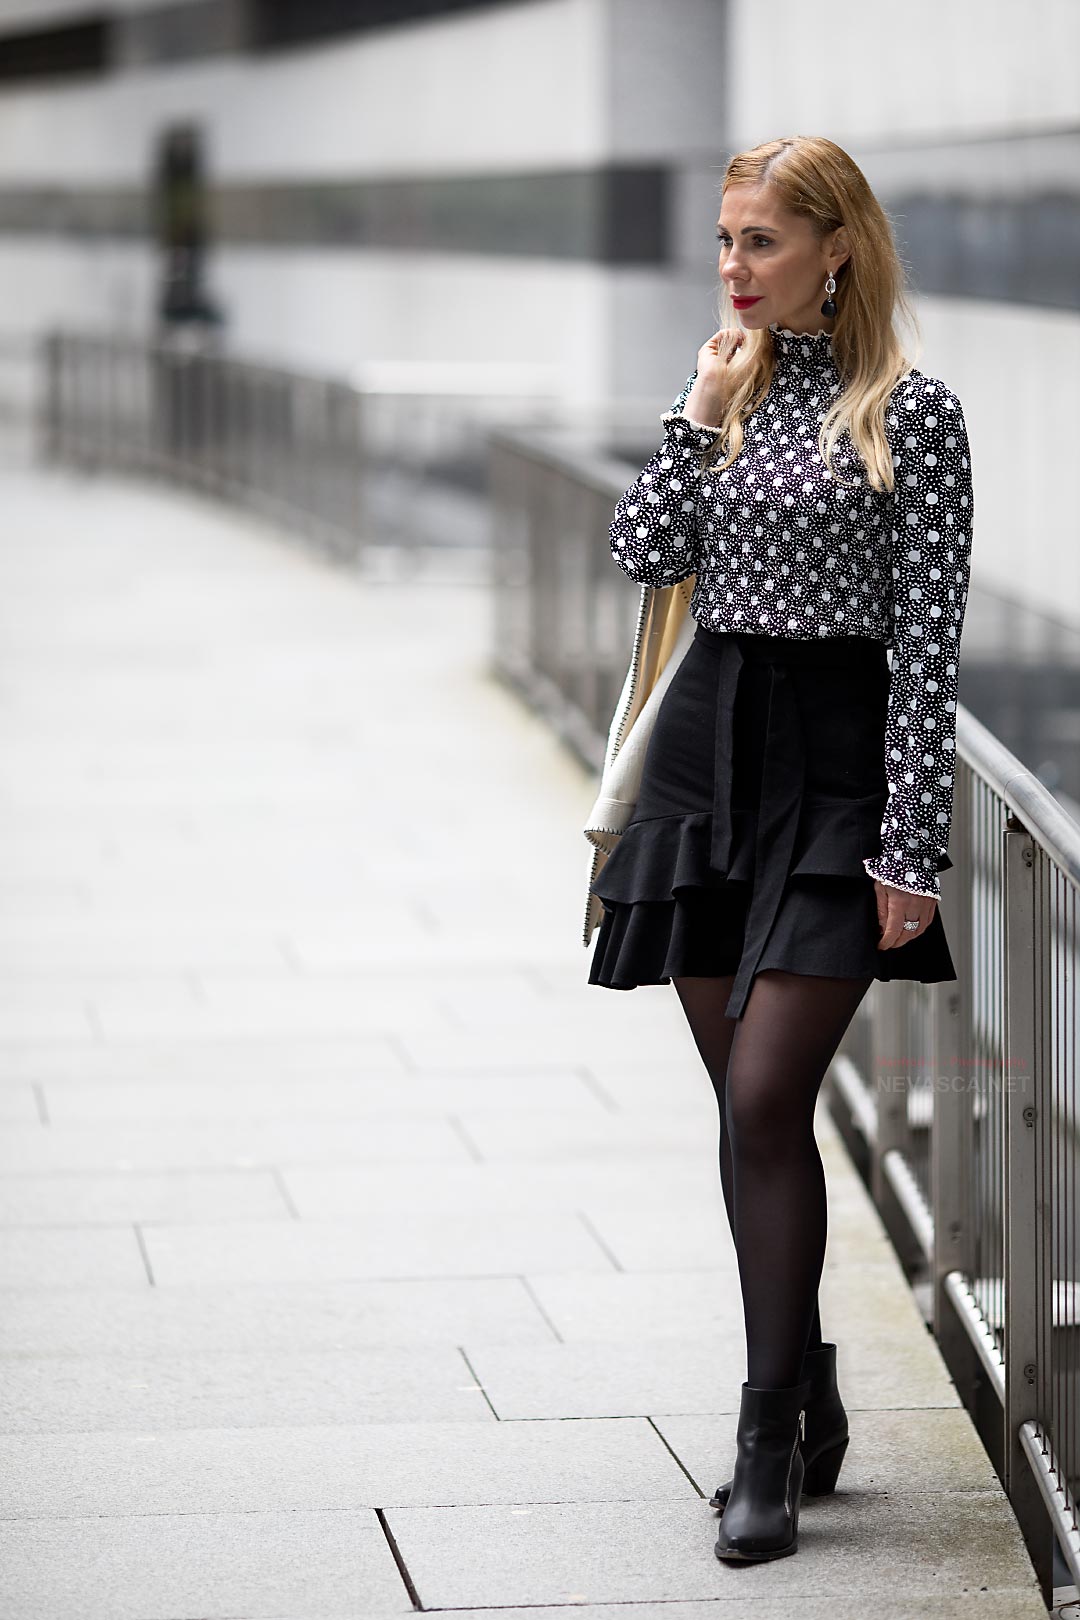 Fashion photo of a woman in the banking quarter in Stuttgart.